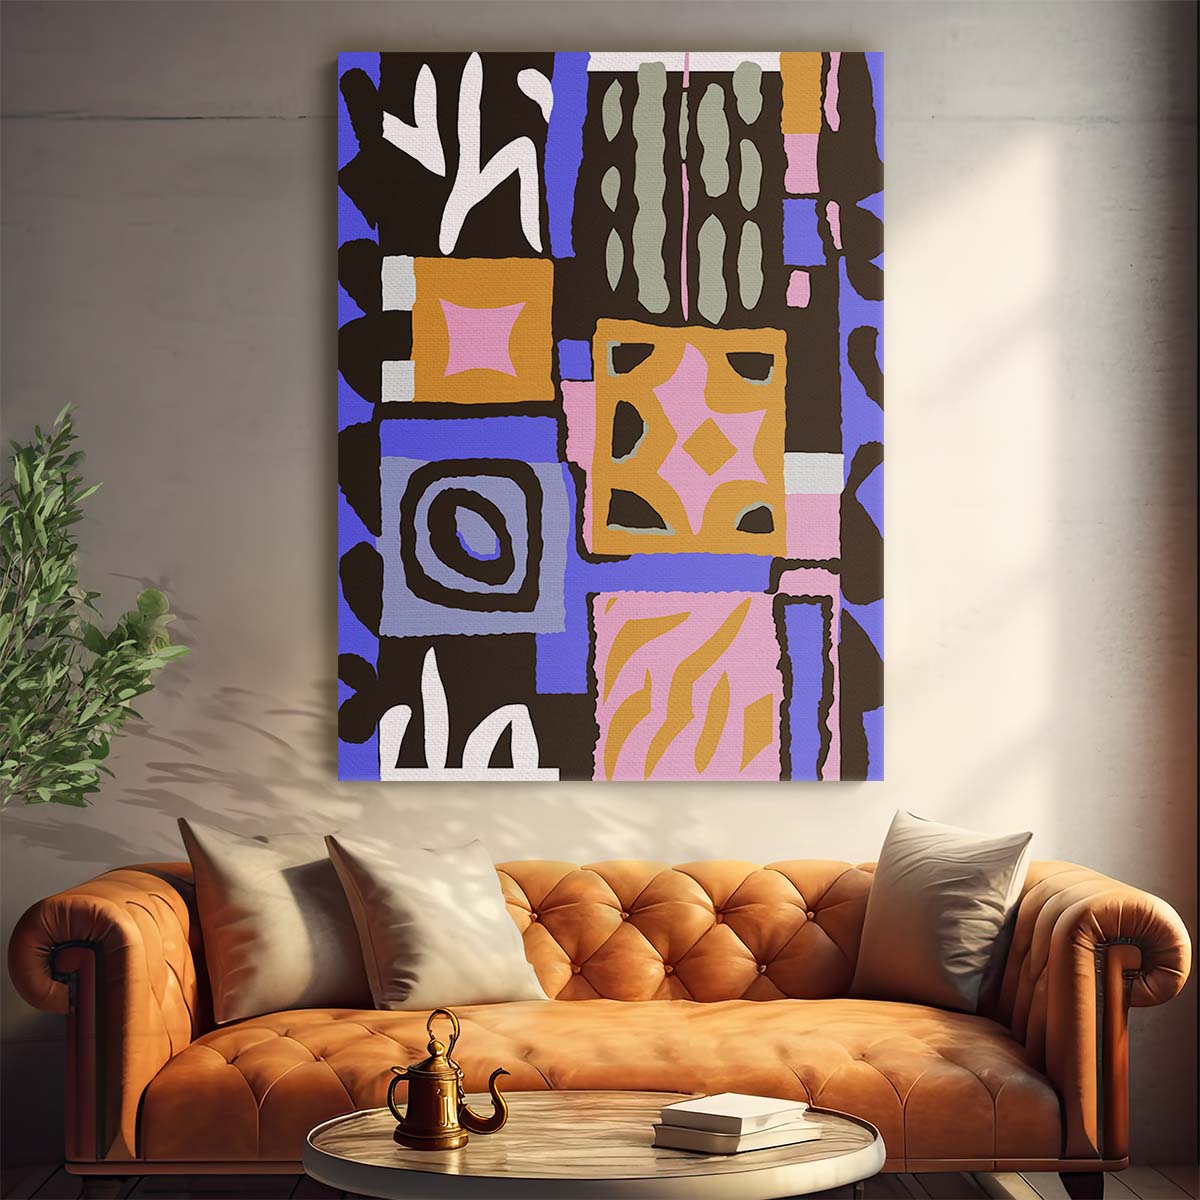 Abstract Geometric Peru Pattern Colorful Purple and Orange Illustration by Treechild by Luxuriance Designs, made in USA